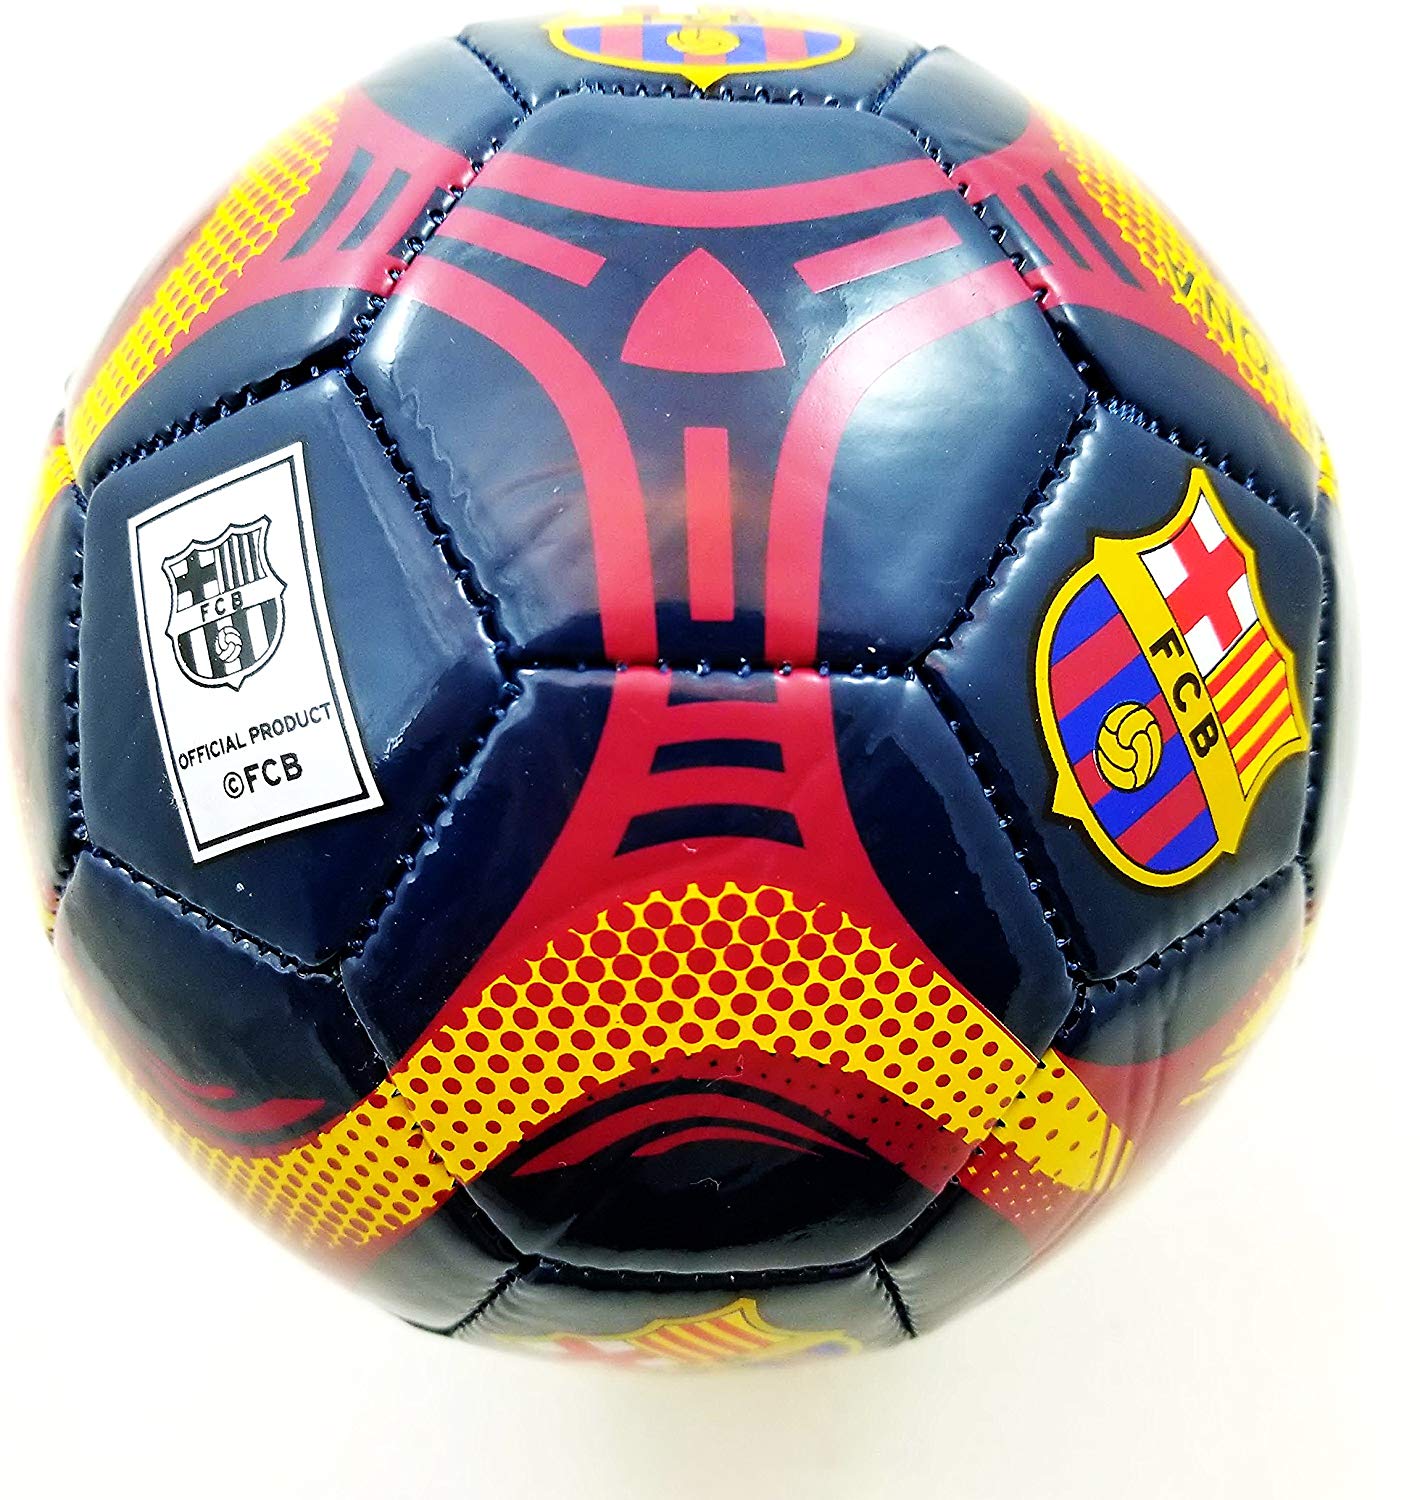 Icon Sports FC Barcelona Soccer Ball Officially Licensed Ball Size 2 02-5 - image 2 of 2